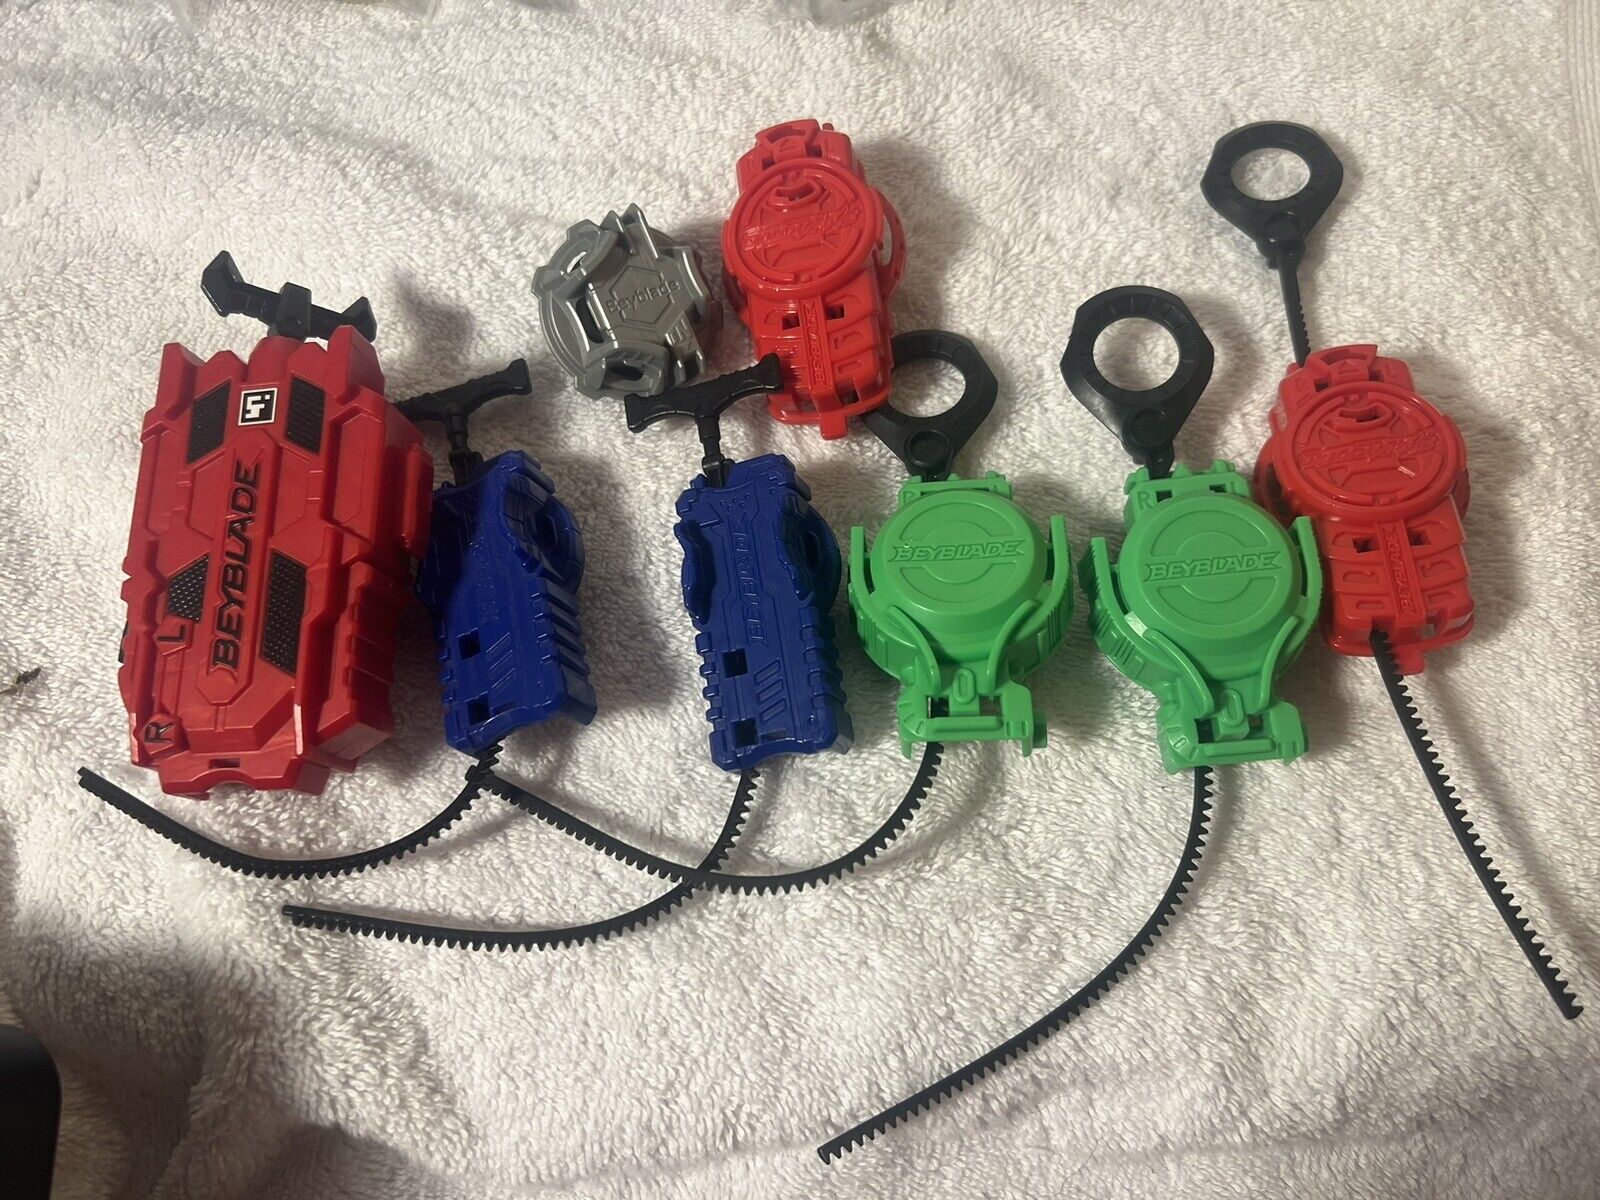 Lot Beyblade Launchers Ripcords Zipcords Accessories